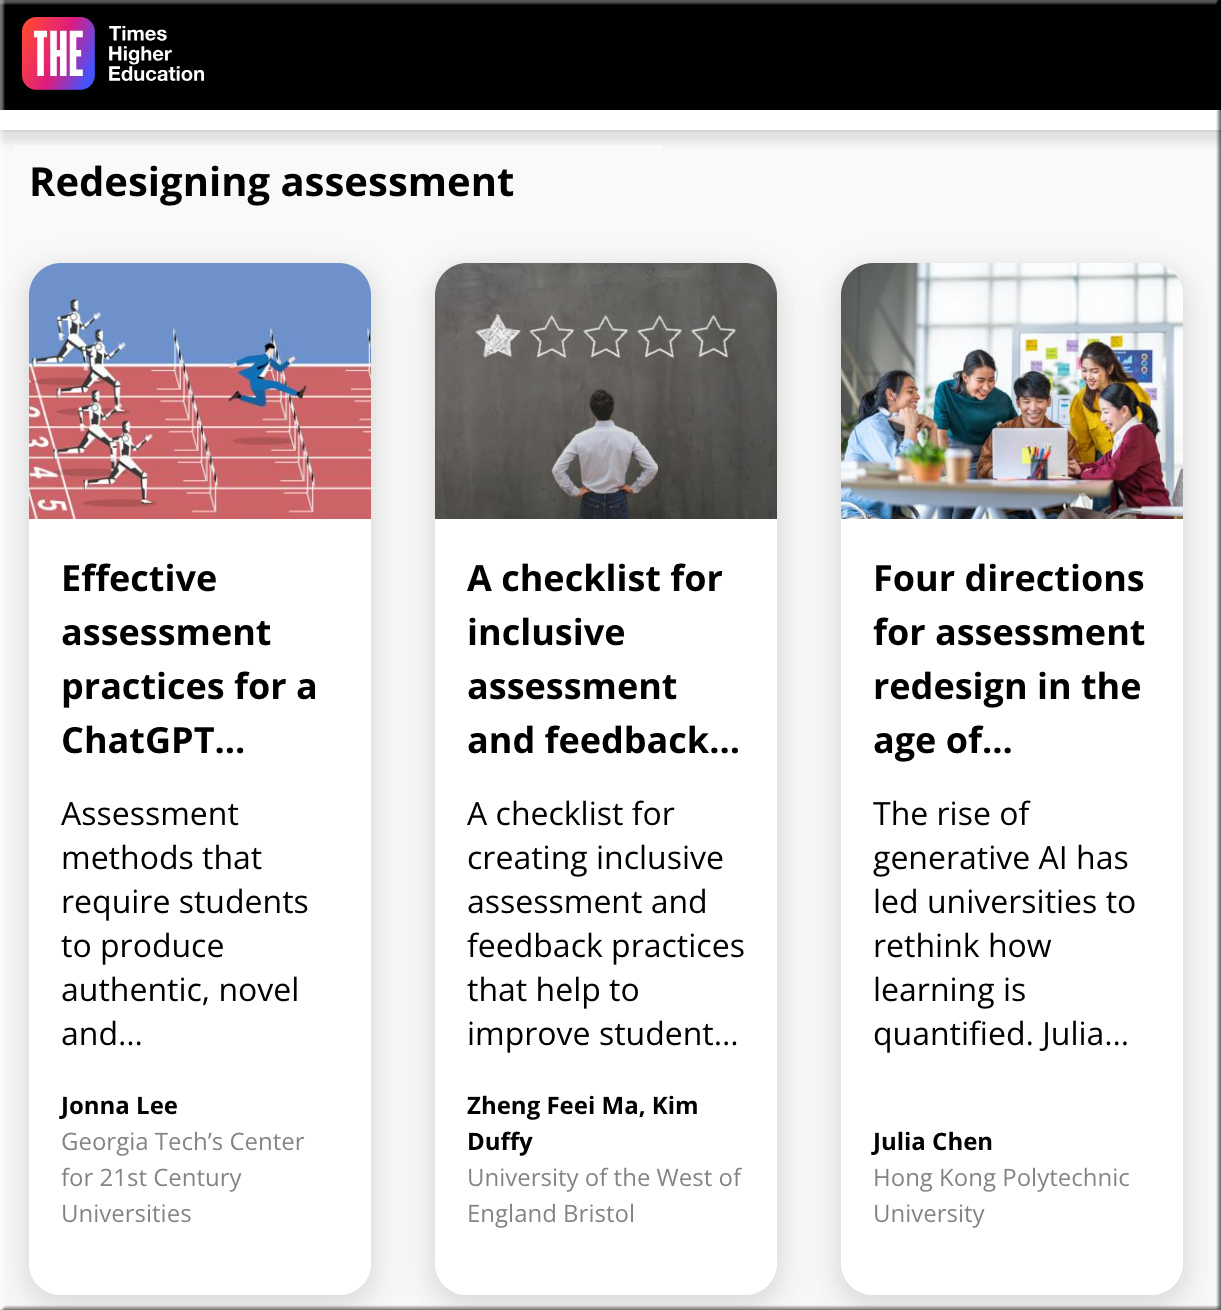 Items from Times Higher Education re: redesigning assessment